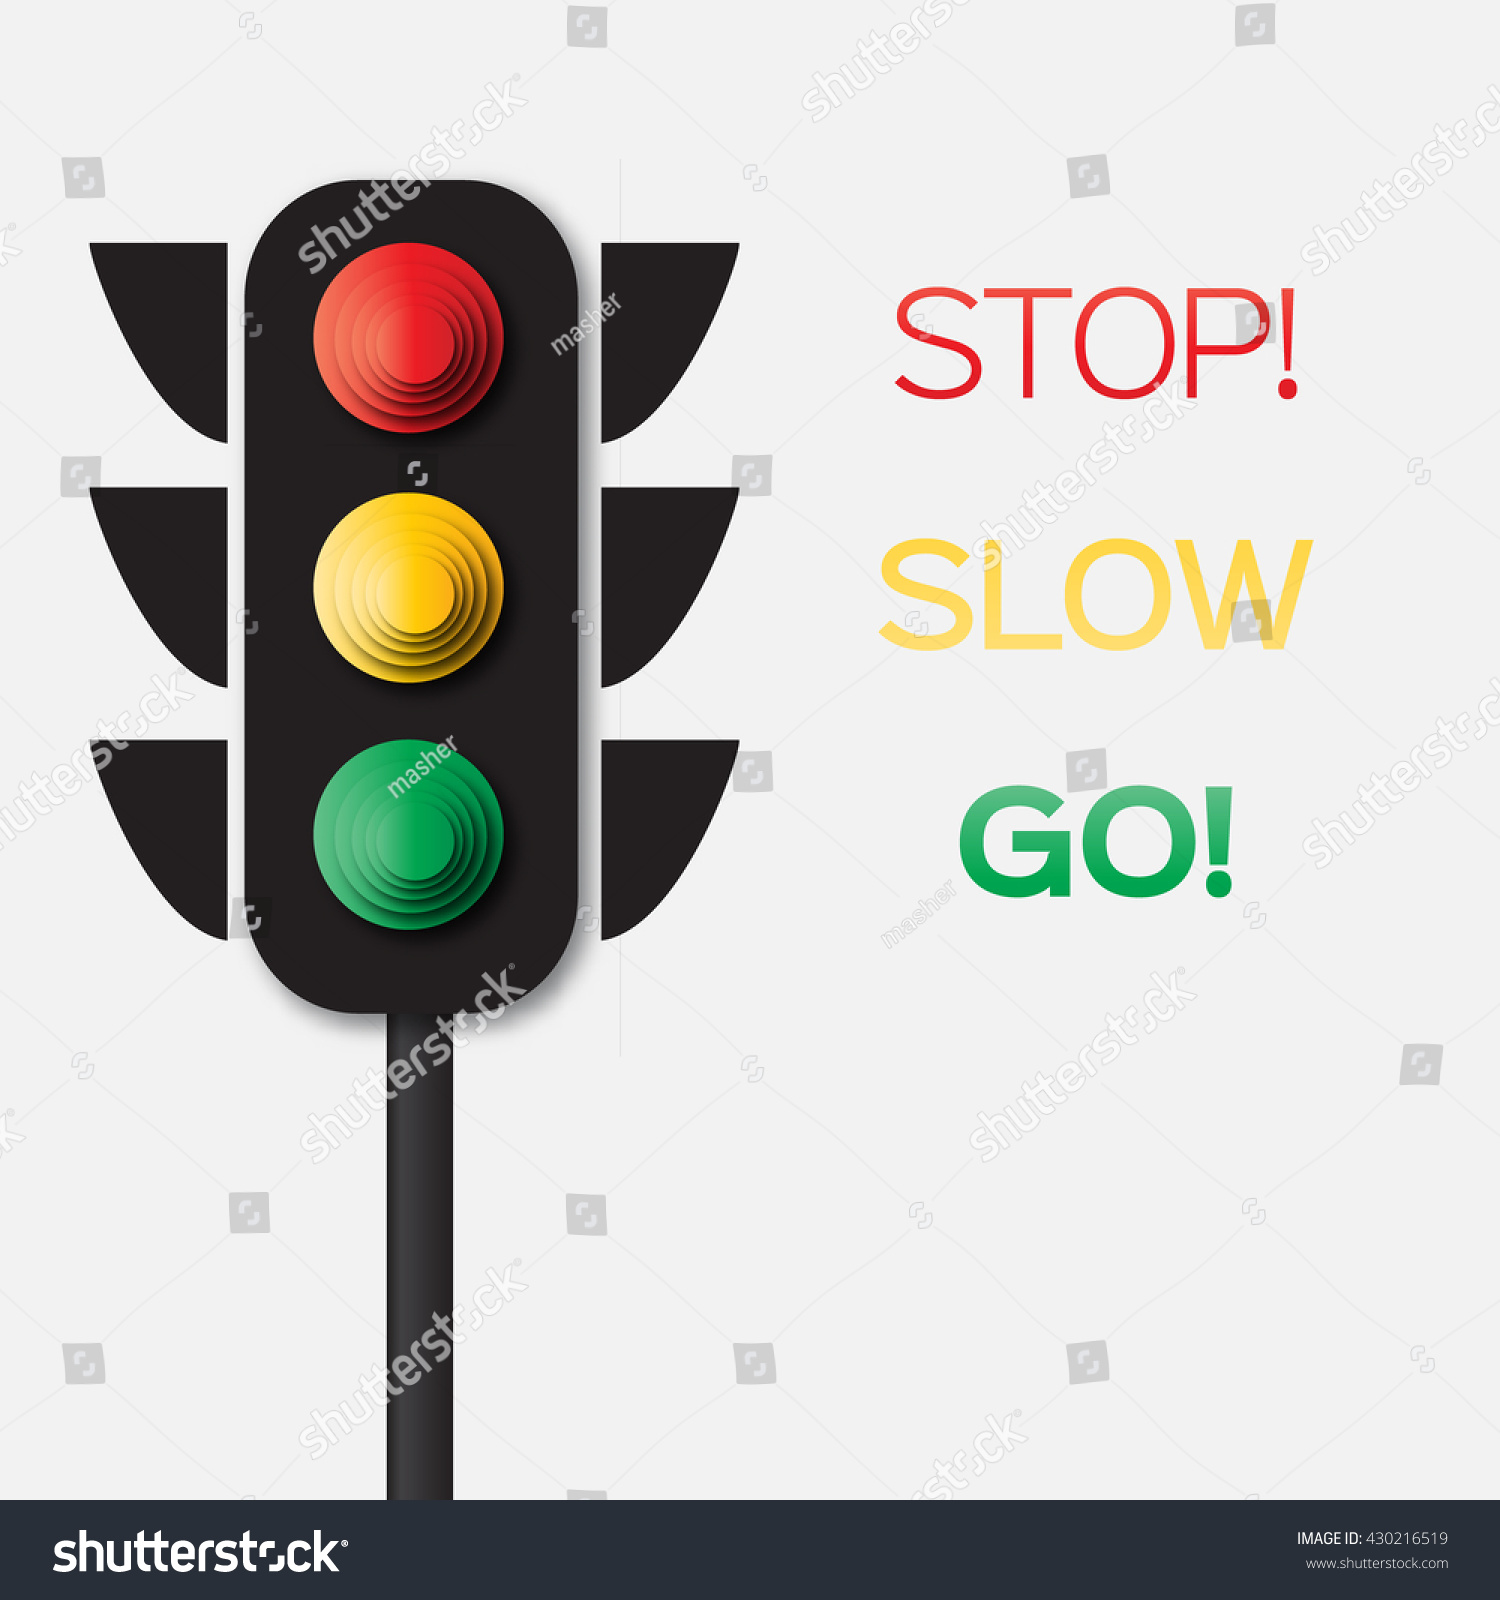 Traffic Light Origami Red Yellow Green Stock Vector Royalty Free 430216519